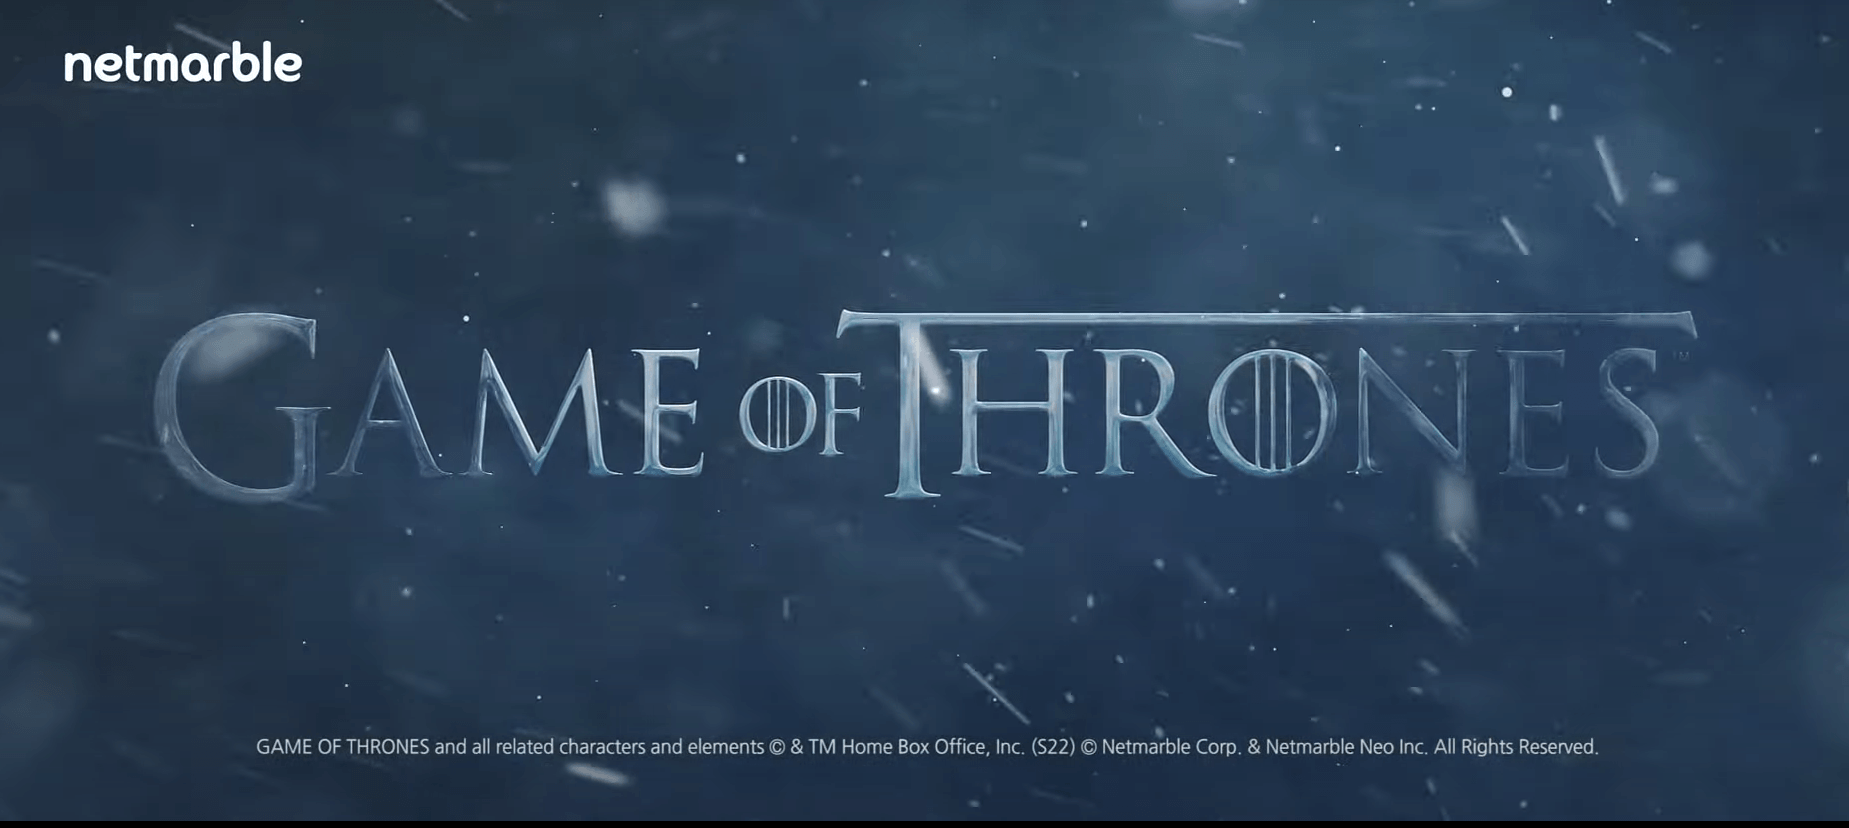 Netmarble: A New Game of Thrones Mobile MMORPG